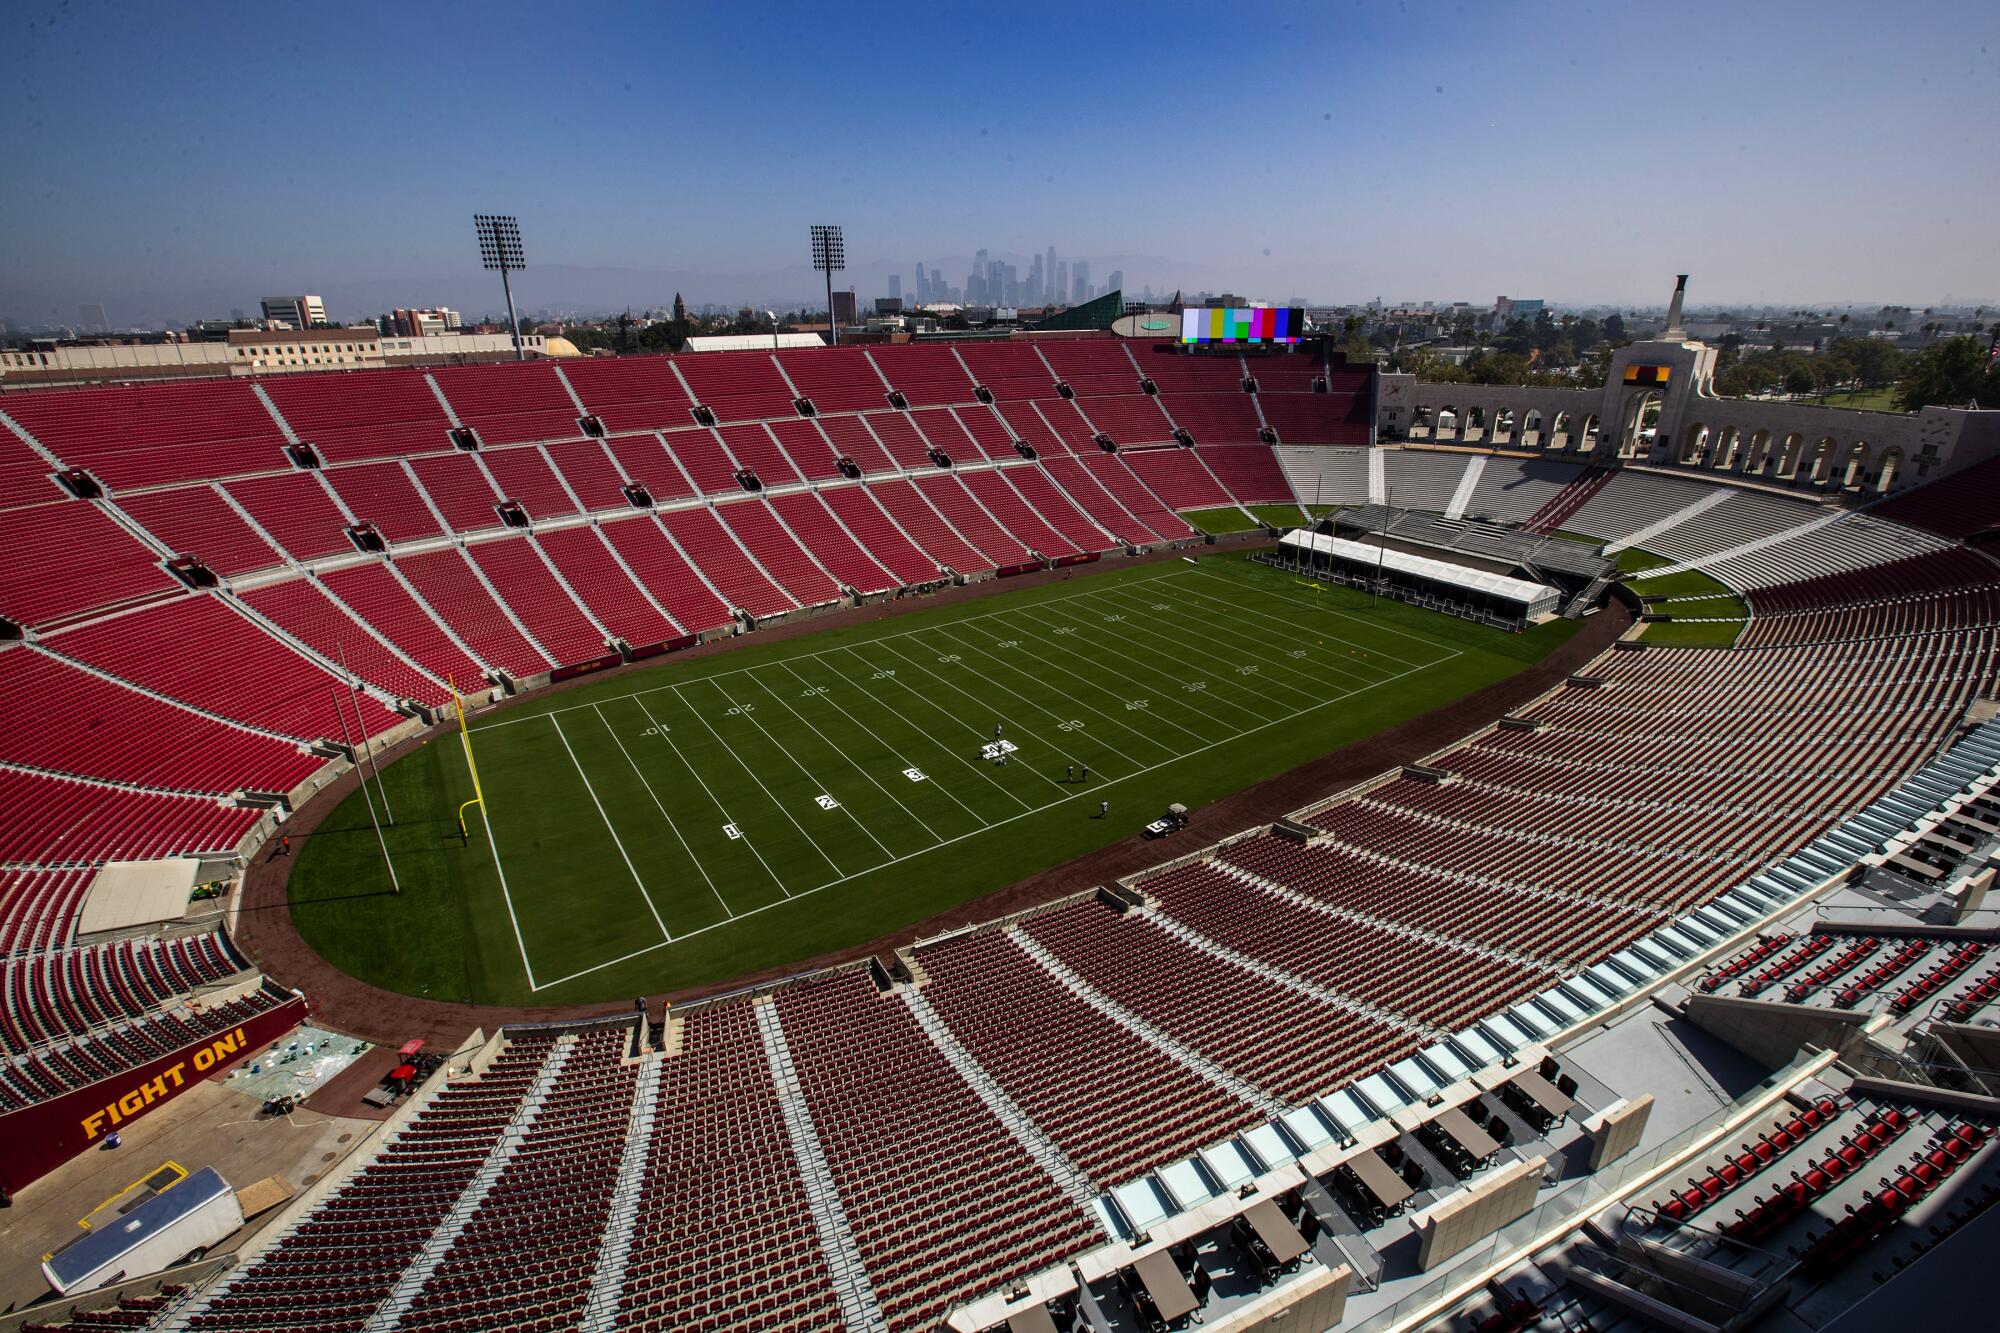 An above view of the Los Angeles Memorial Coliseum.